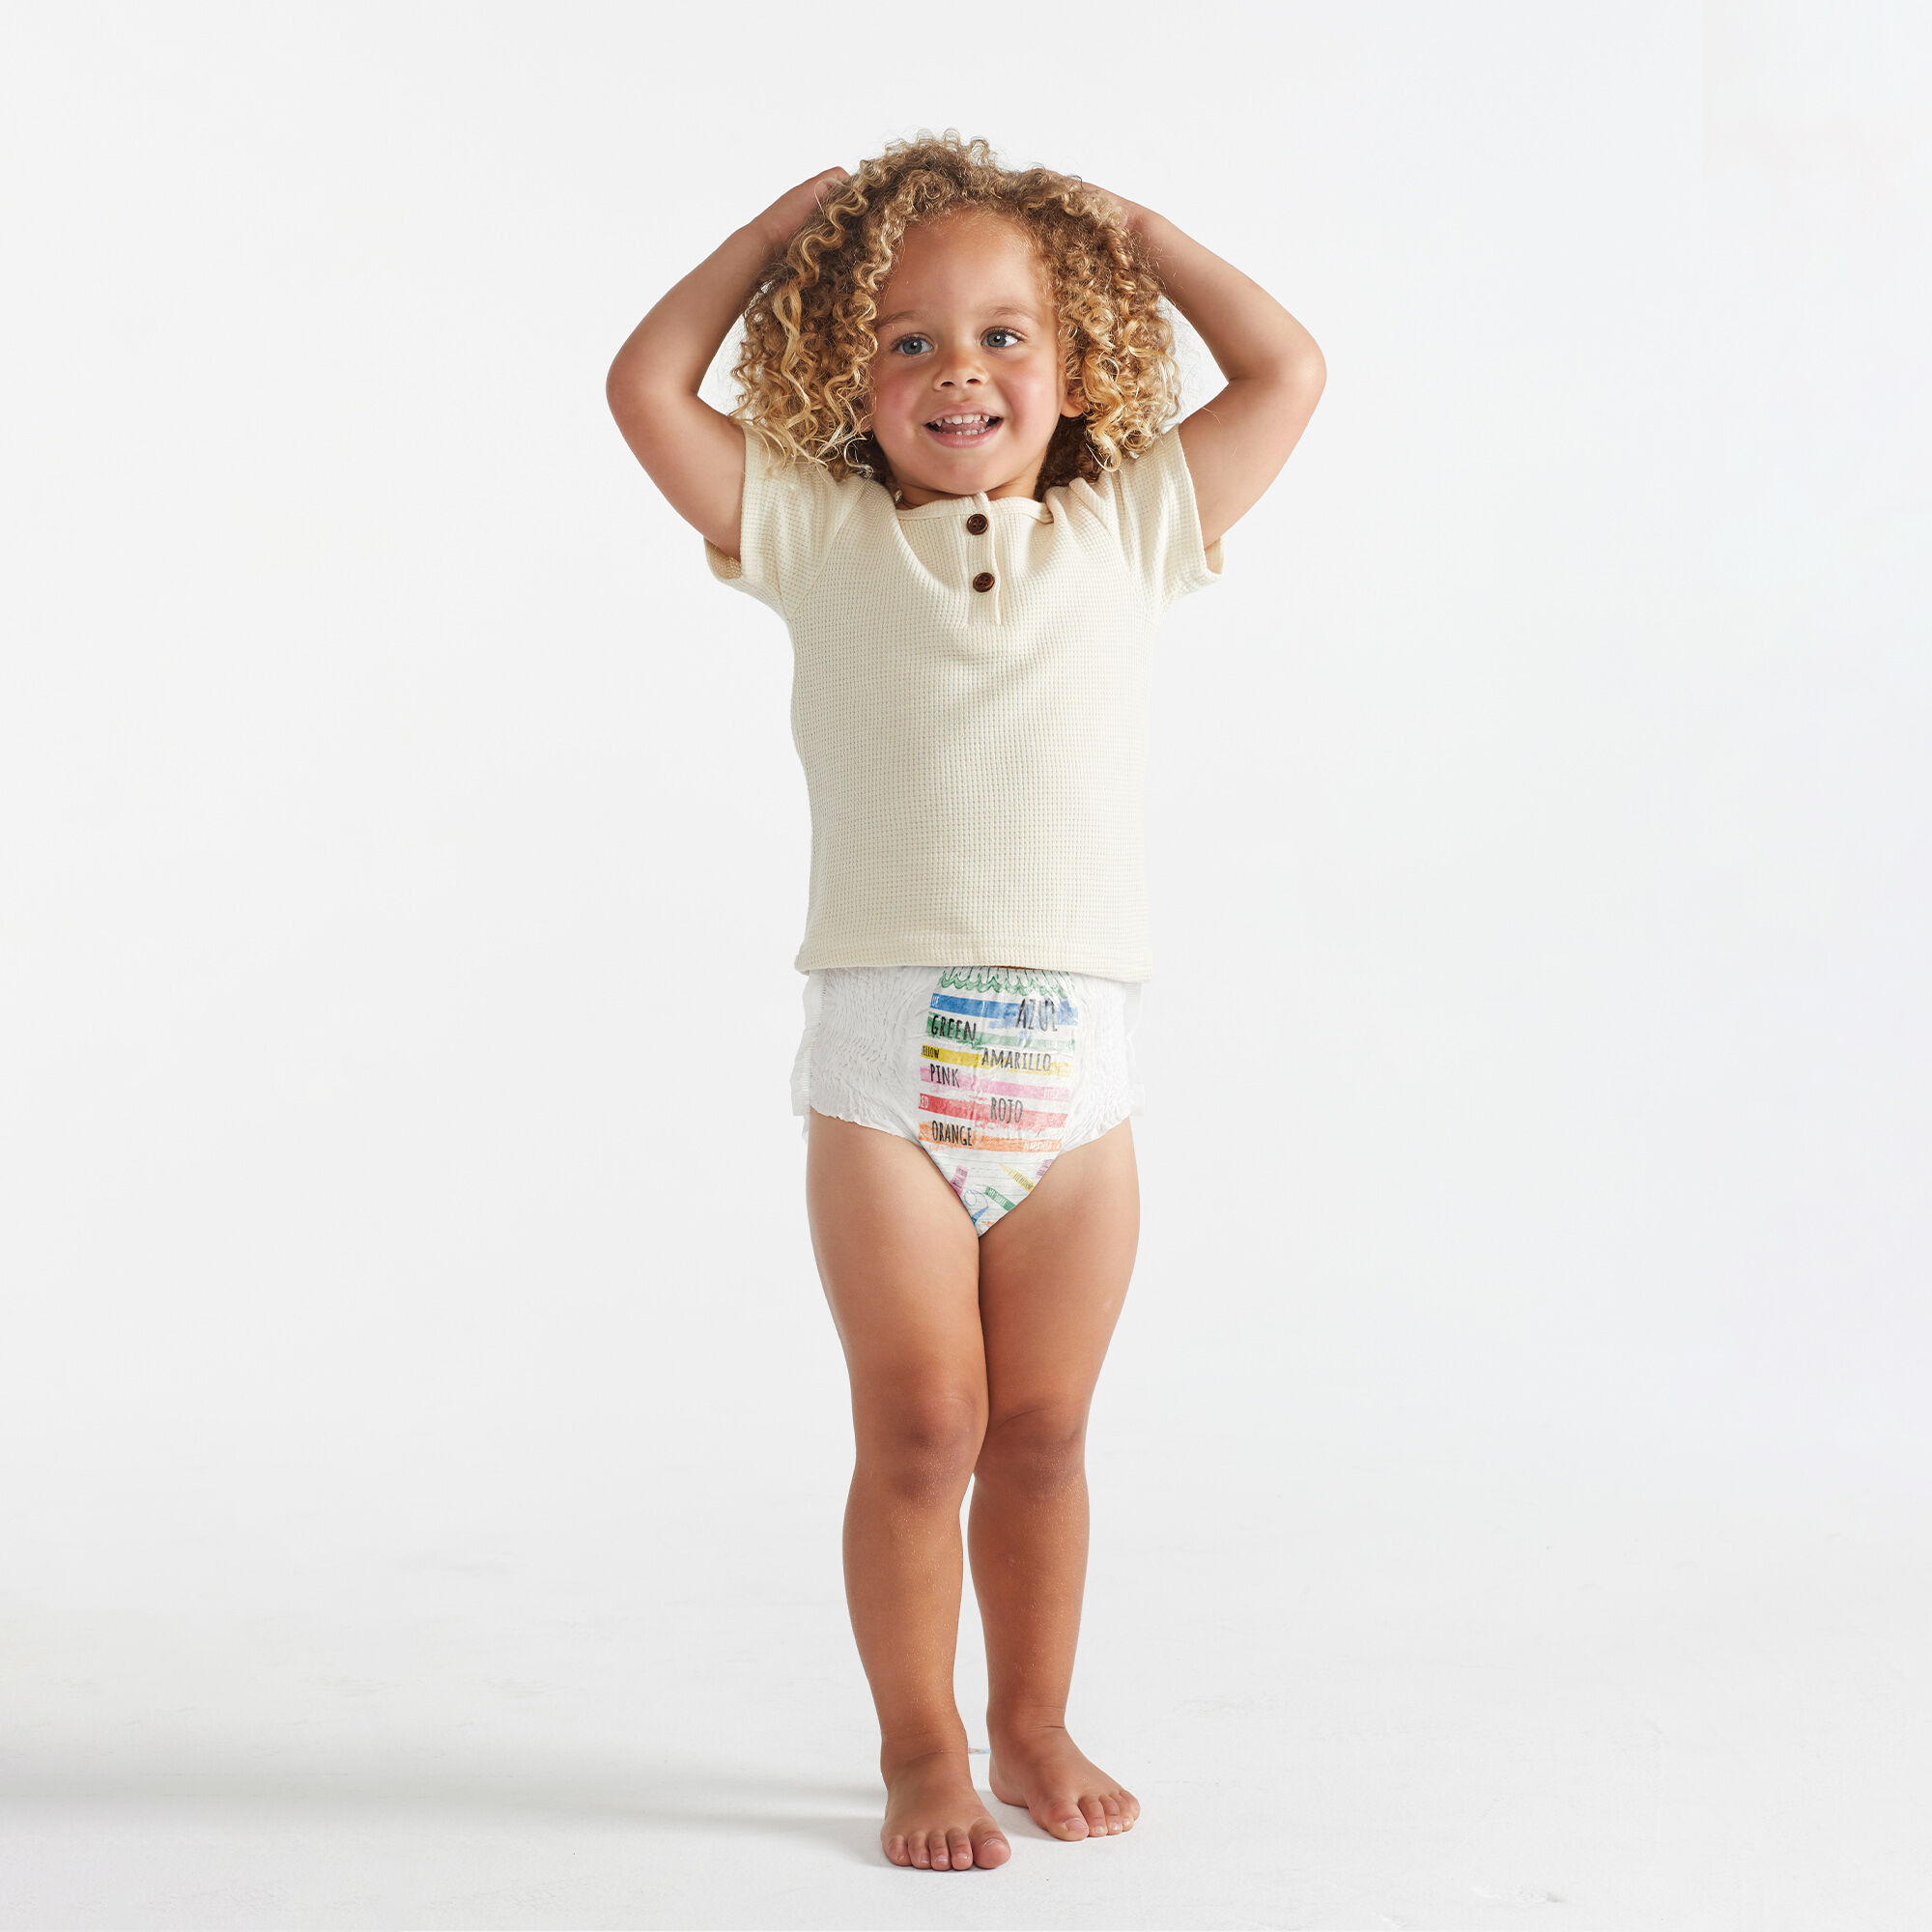 Buy Honest Training Pants, Animal Abcs, 2T-3T, 26 Count Online at Low  Prices in India 